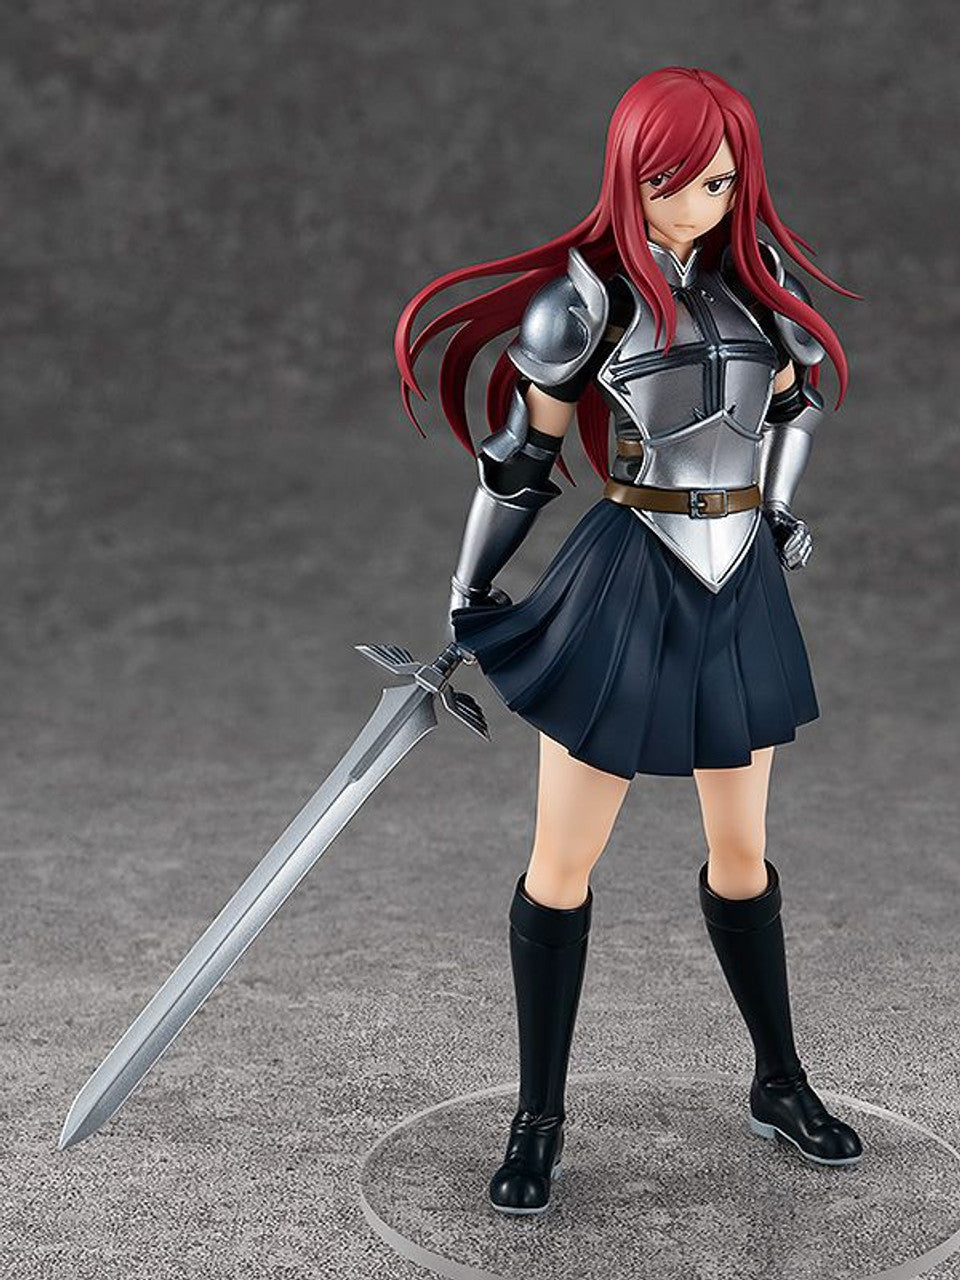 Fairy Tail Pop Up Parade &quot;Erza Scarlet&quot; (Re-Run)-Good Smile Company-Ace Cards &amp; Collectibles